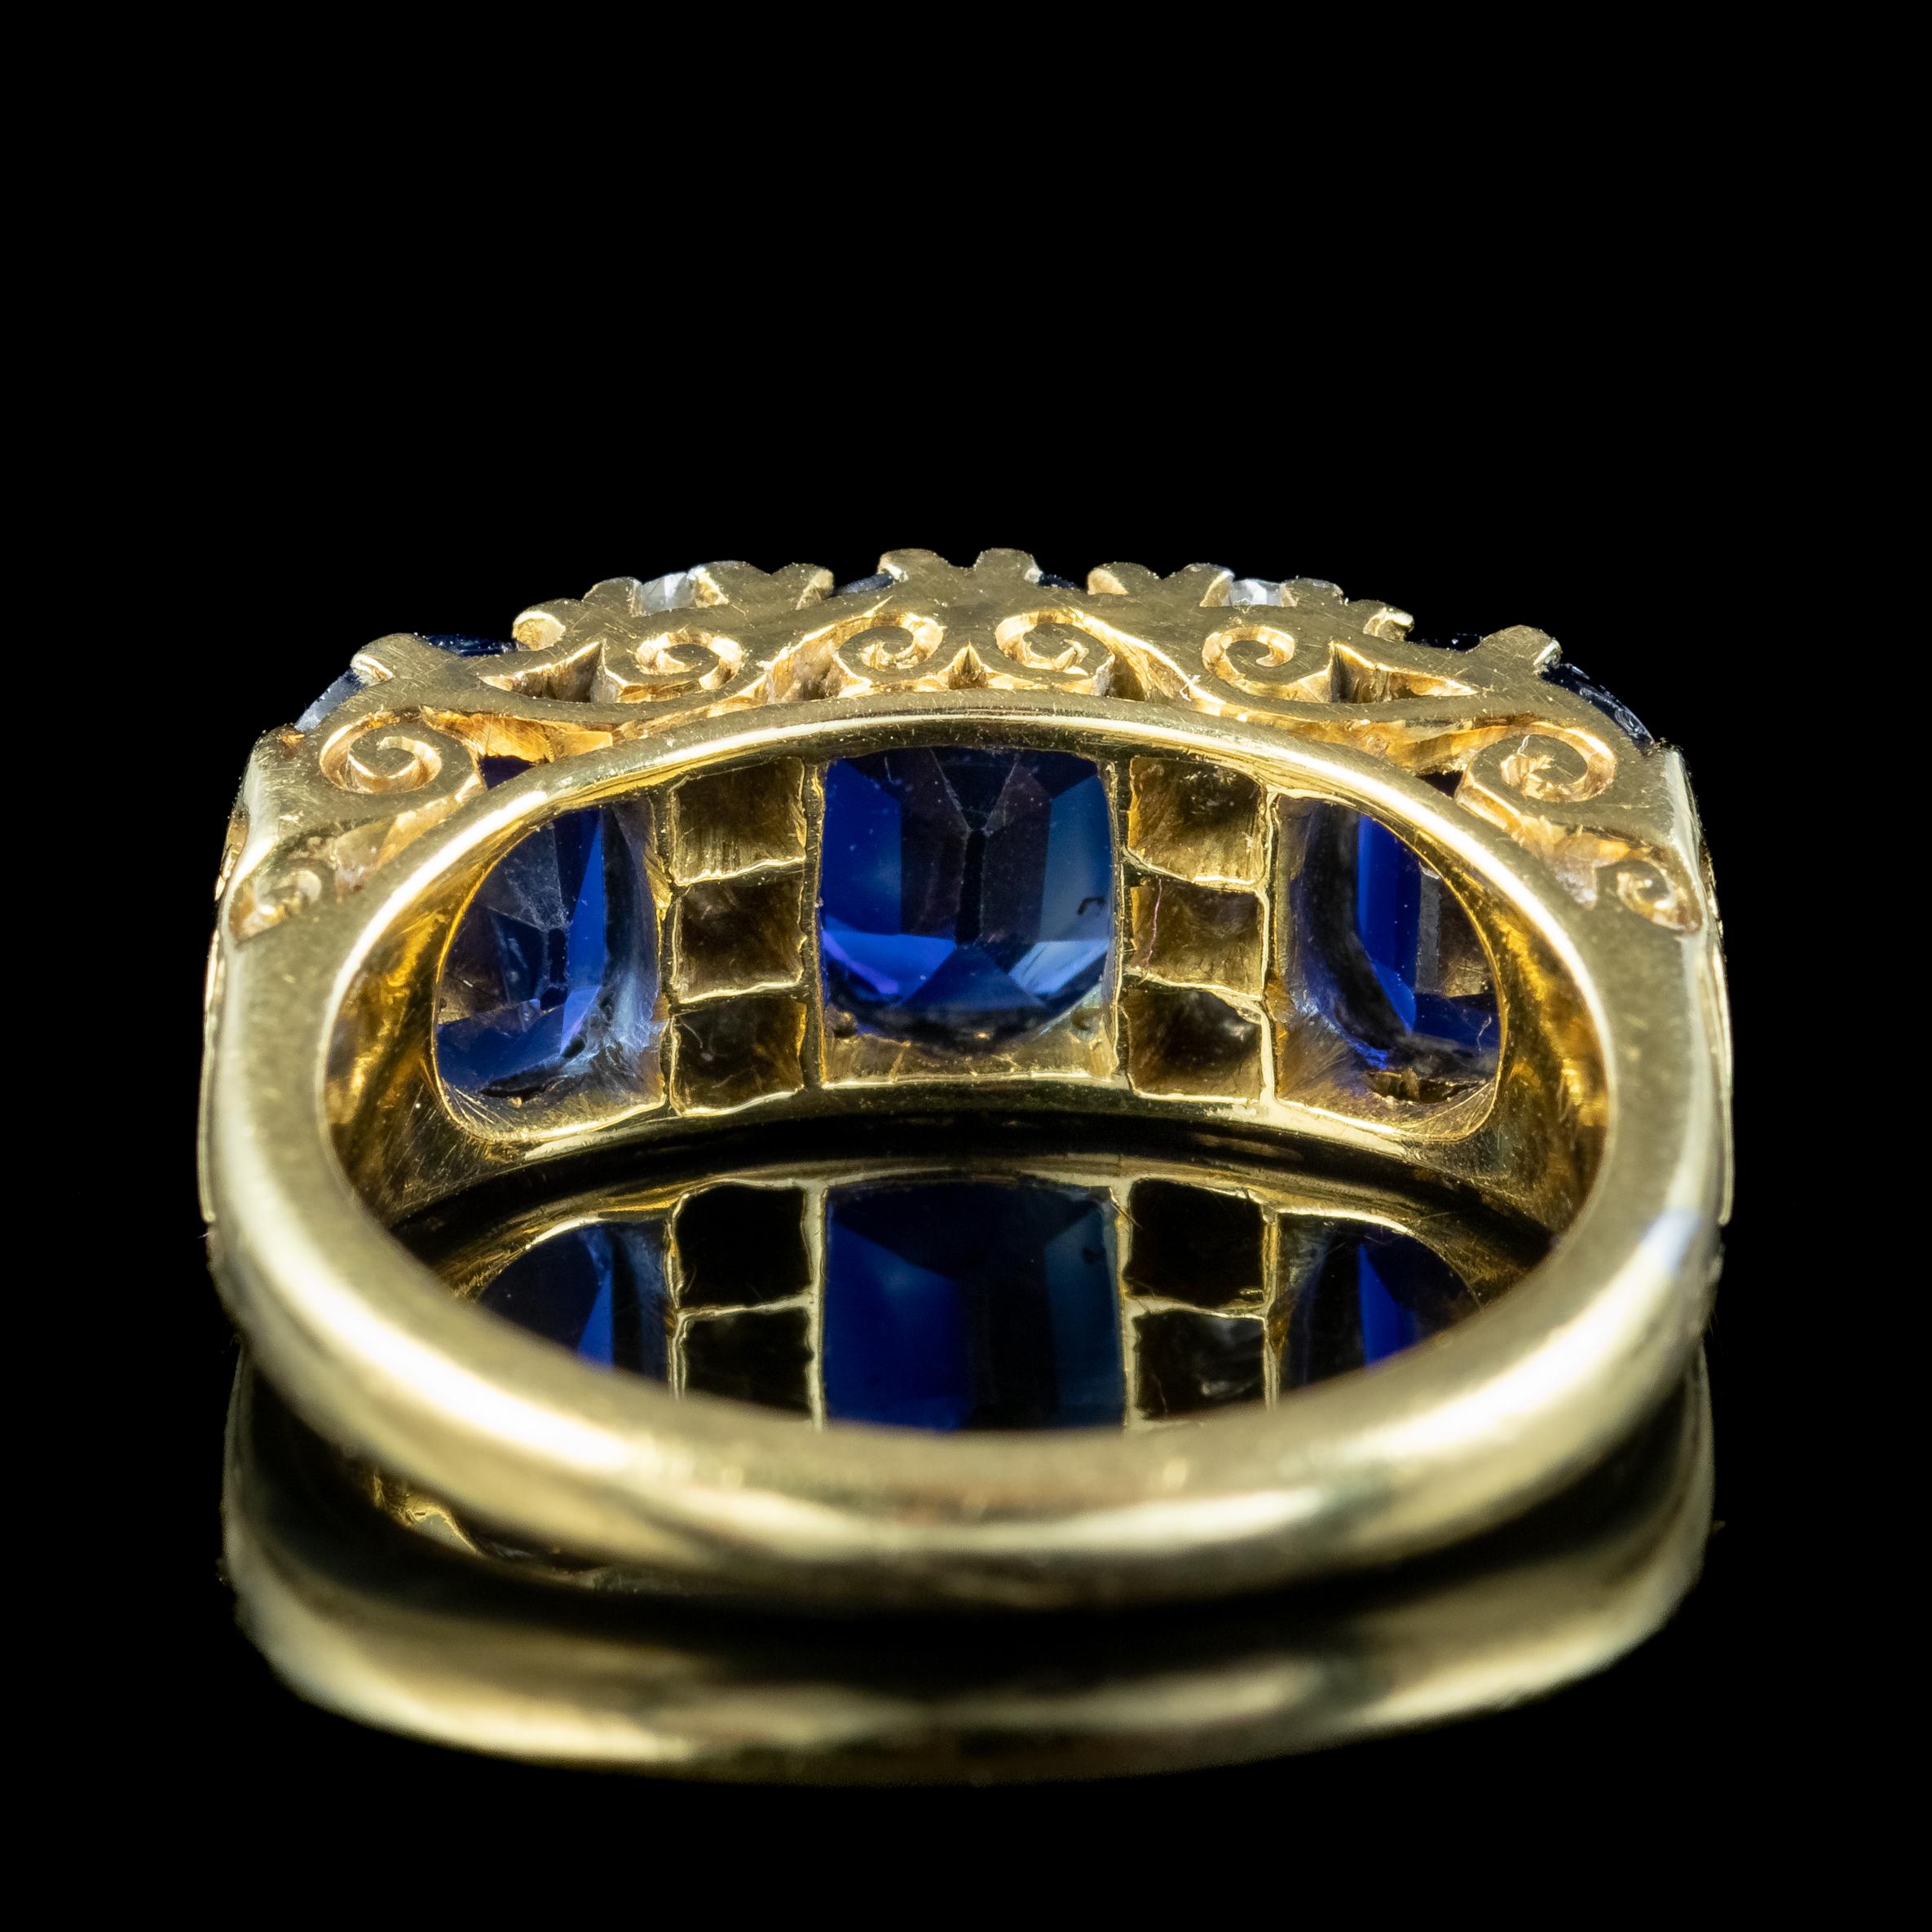 Antique Edwardian Sapphire Diamond Ring 2.7ct Sapphire With Cert In Good Condition For Sale In Kendal, GB